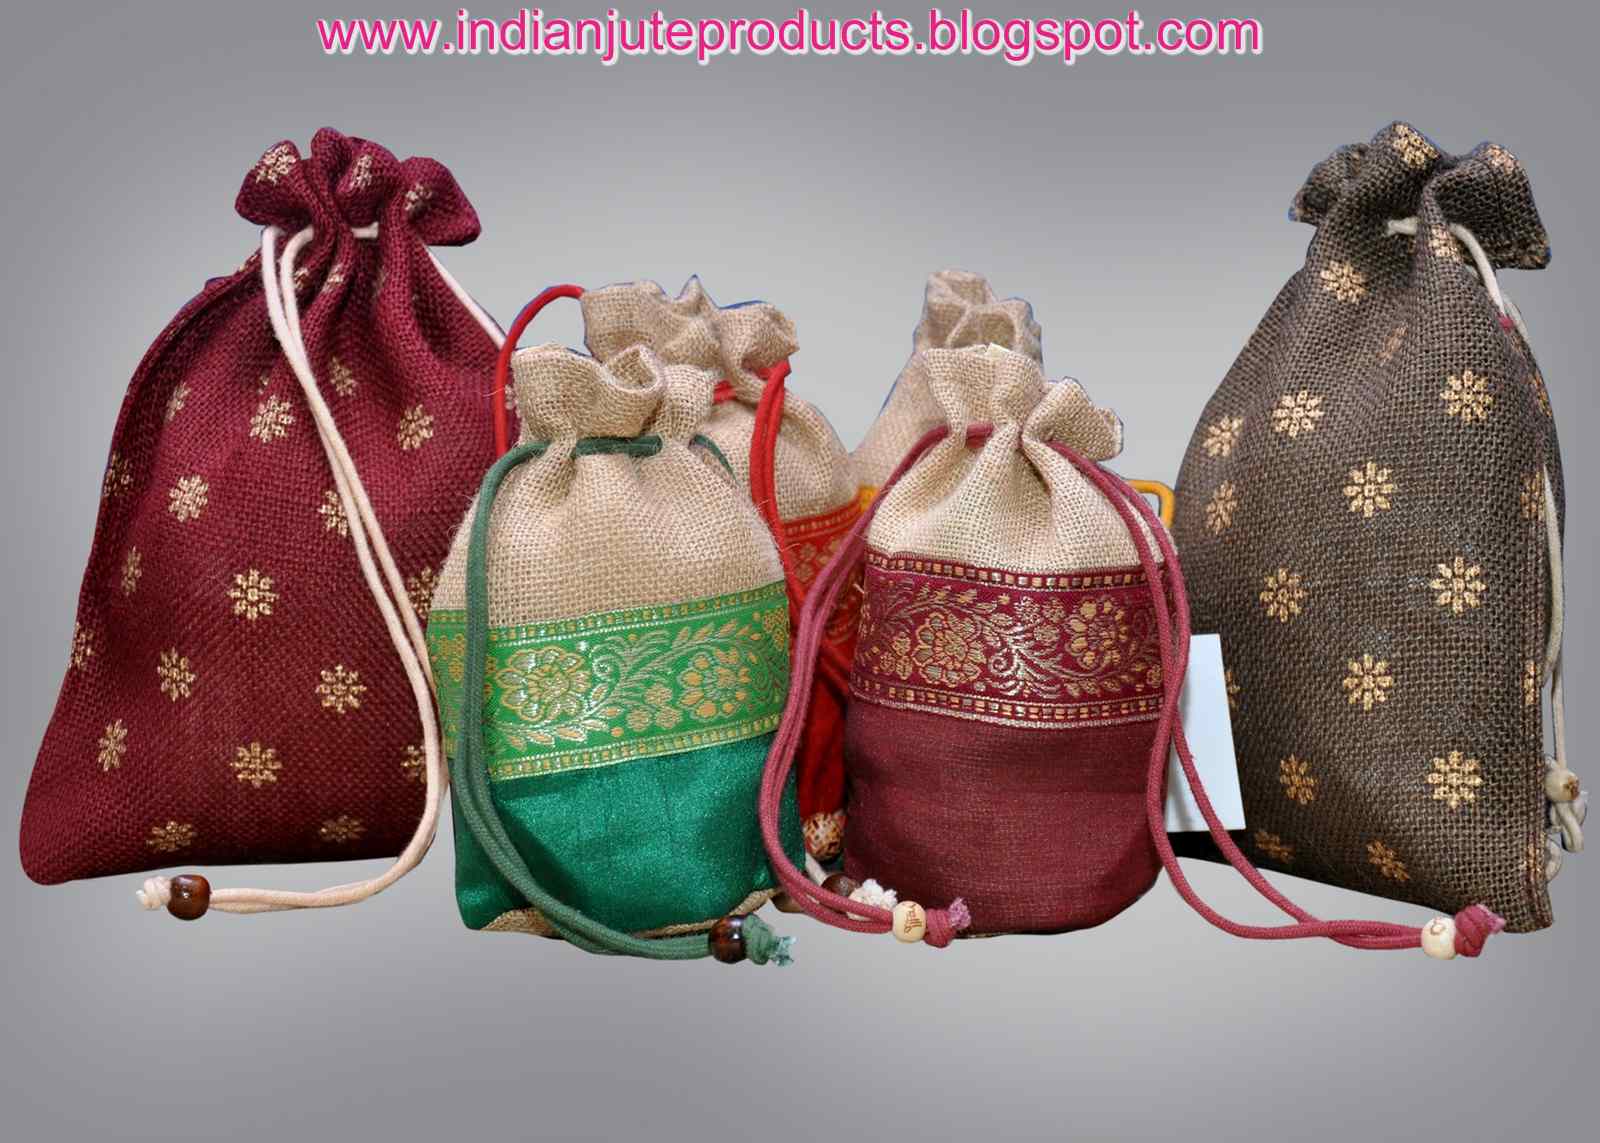 Jute Decorative Lifestyle Products - An Informative BLOG